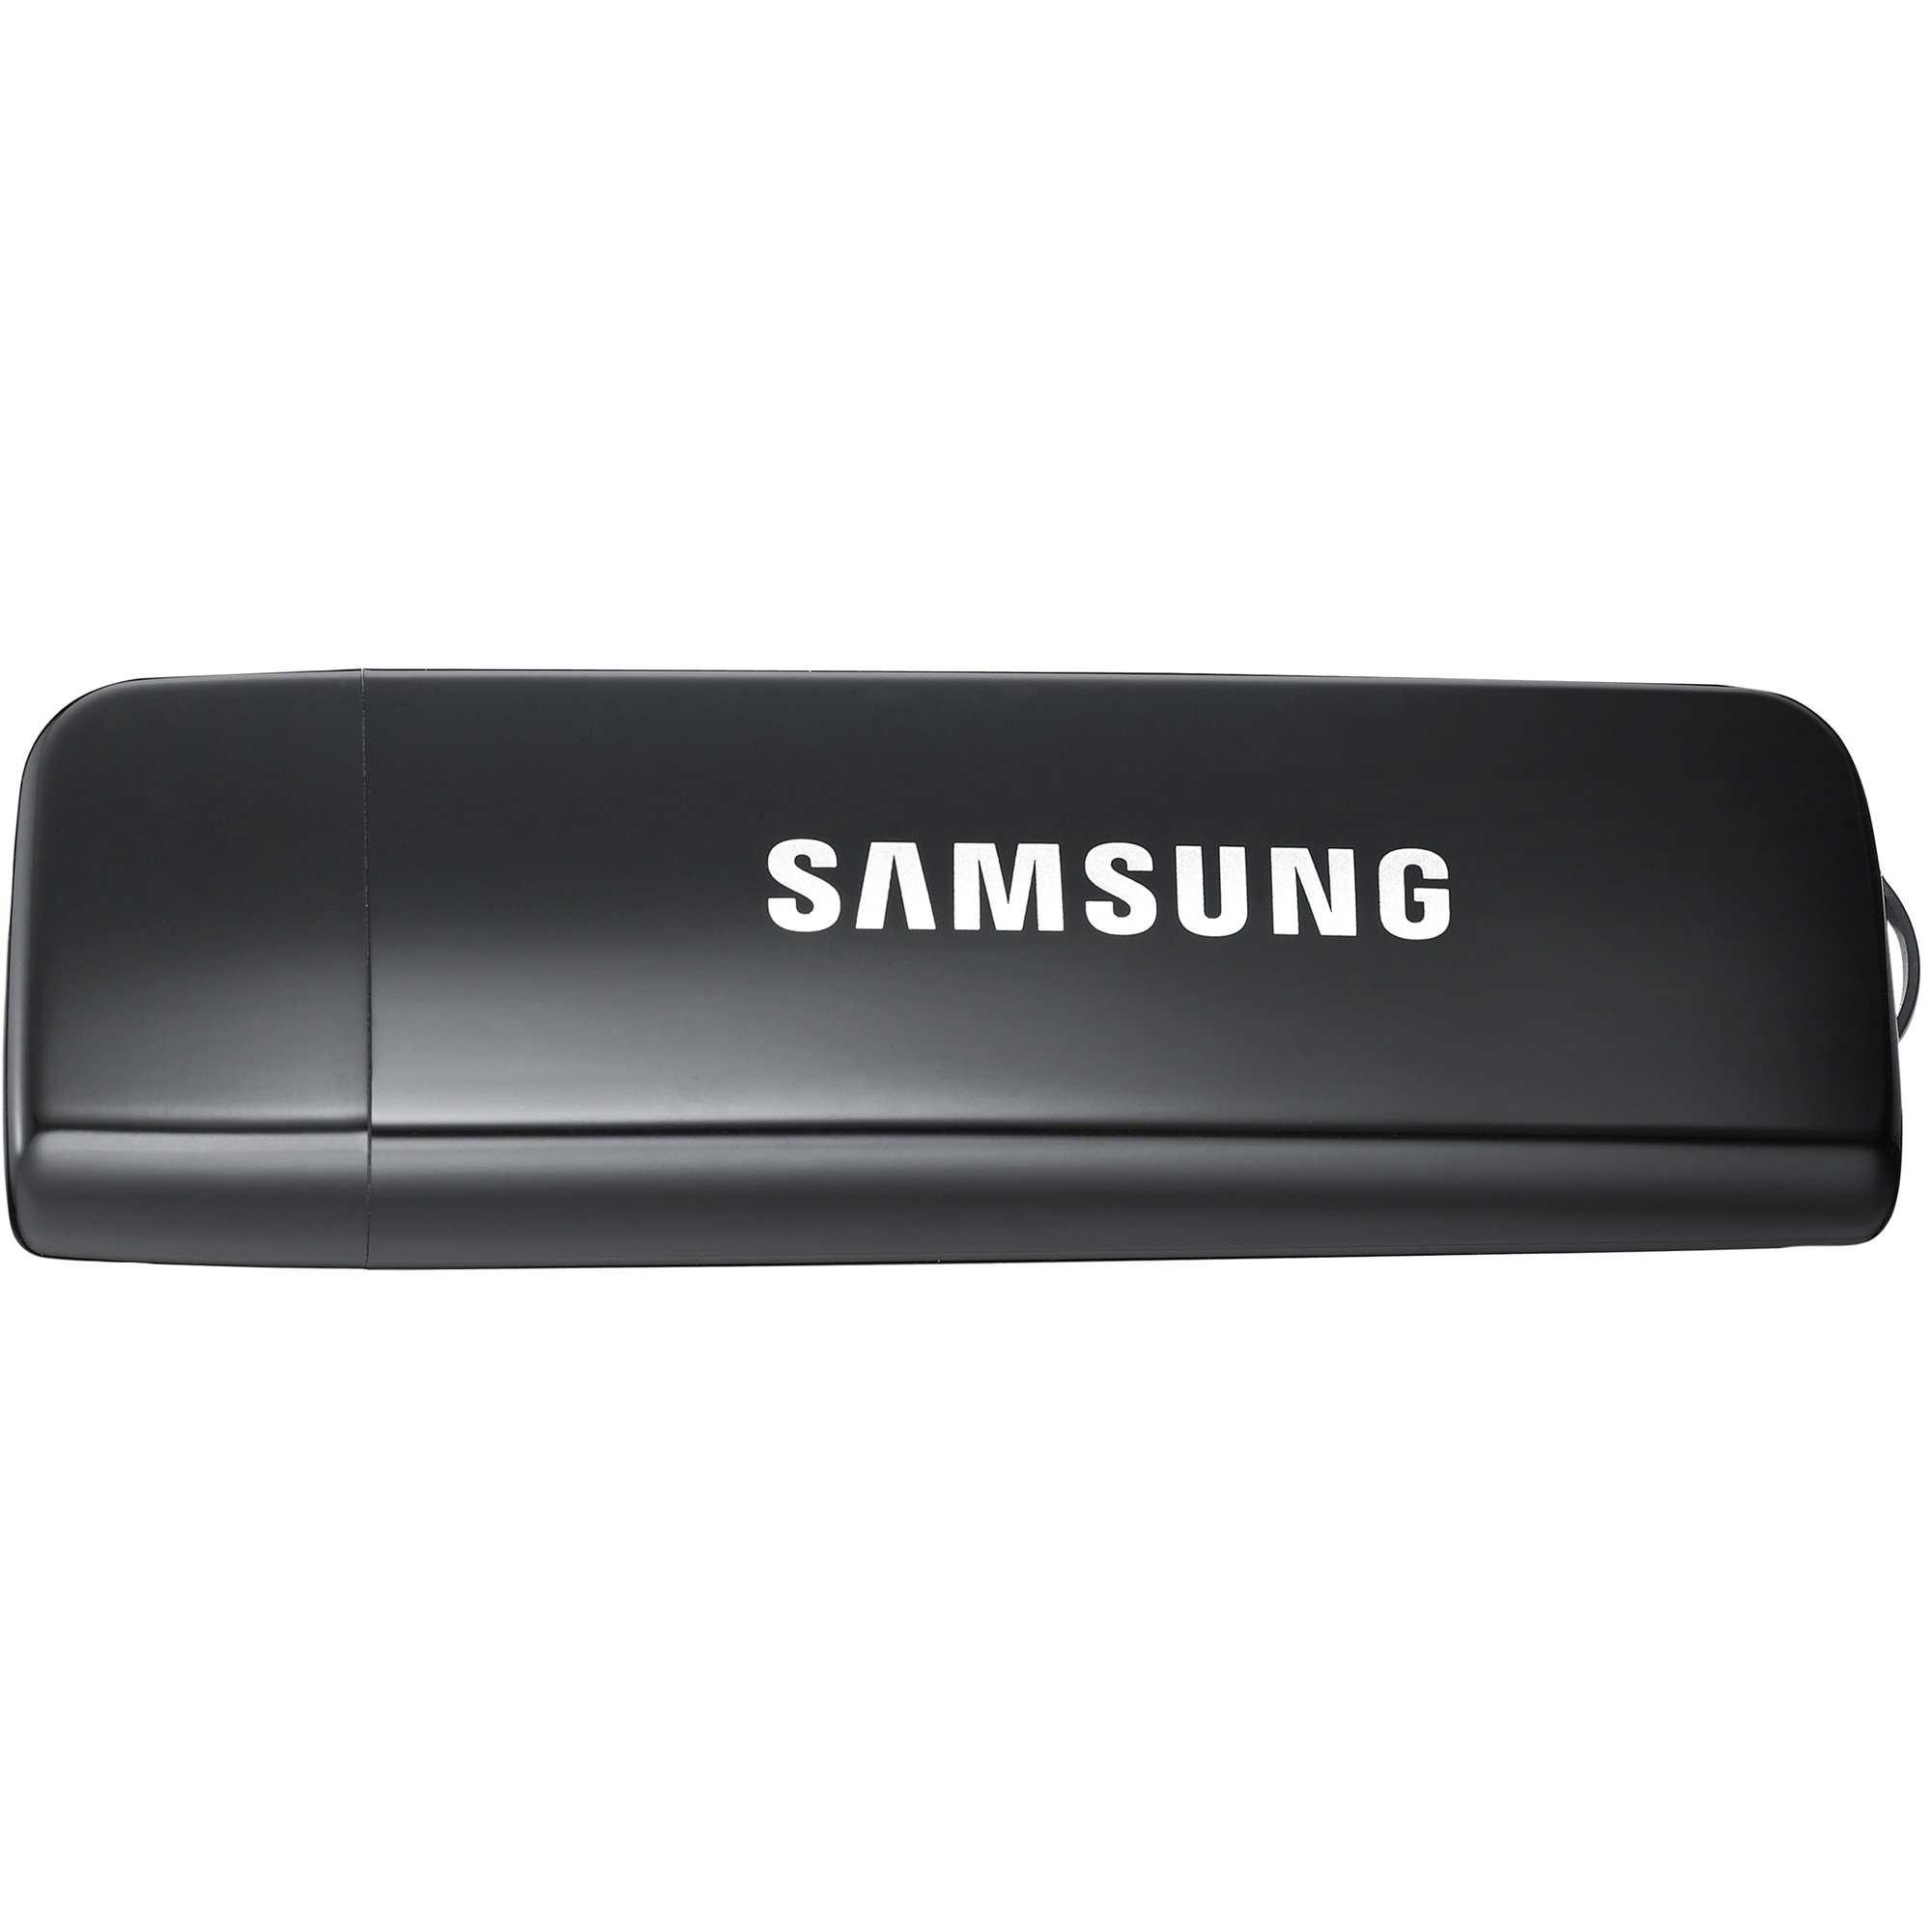 mouse or rat Normalization Extraction USB Wi-Fi dongle Samsung WIS12ABGNX - eMAG.ro